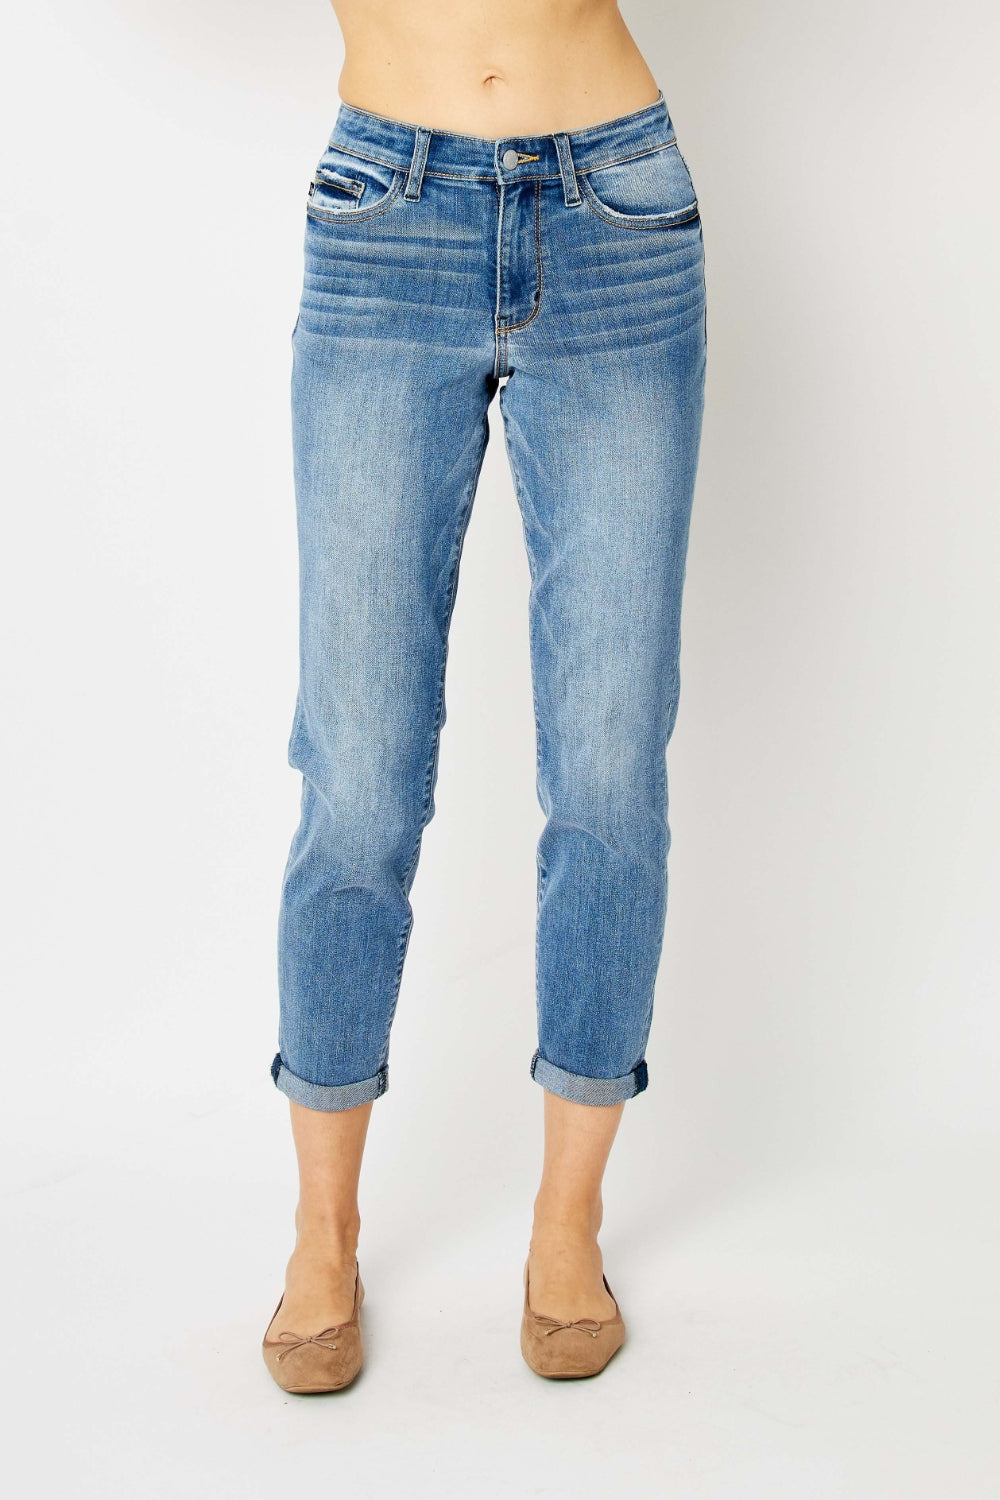 Judy Blue Full Size Cuffed Hem Slim Jeans-Denim-Inspired by Justeen-Women's Clothing Boutique in Chicago, Illinois